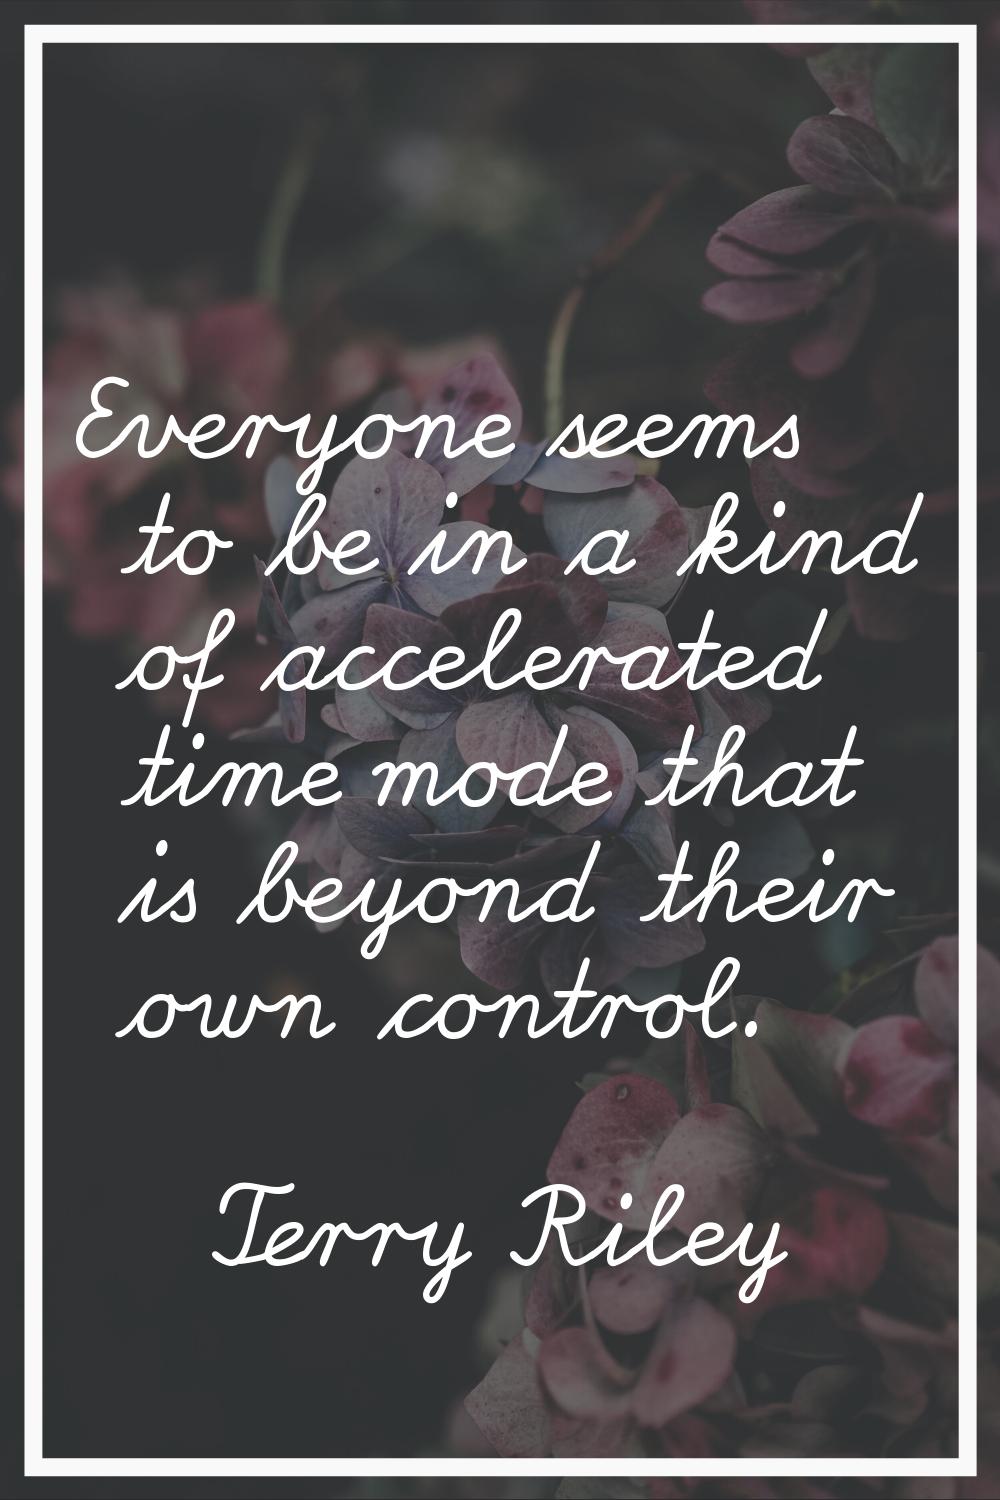 Everyone seems to be in a kind of accelerated time mode that is beyond their own control.